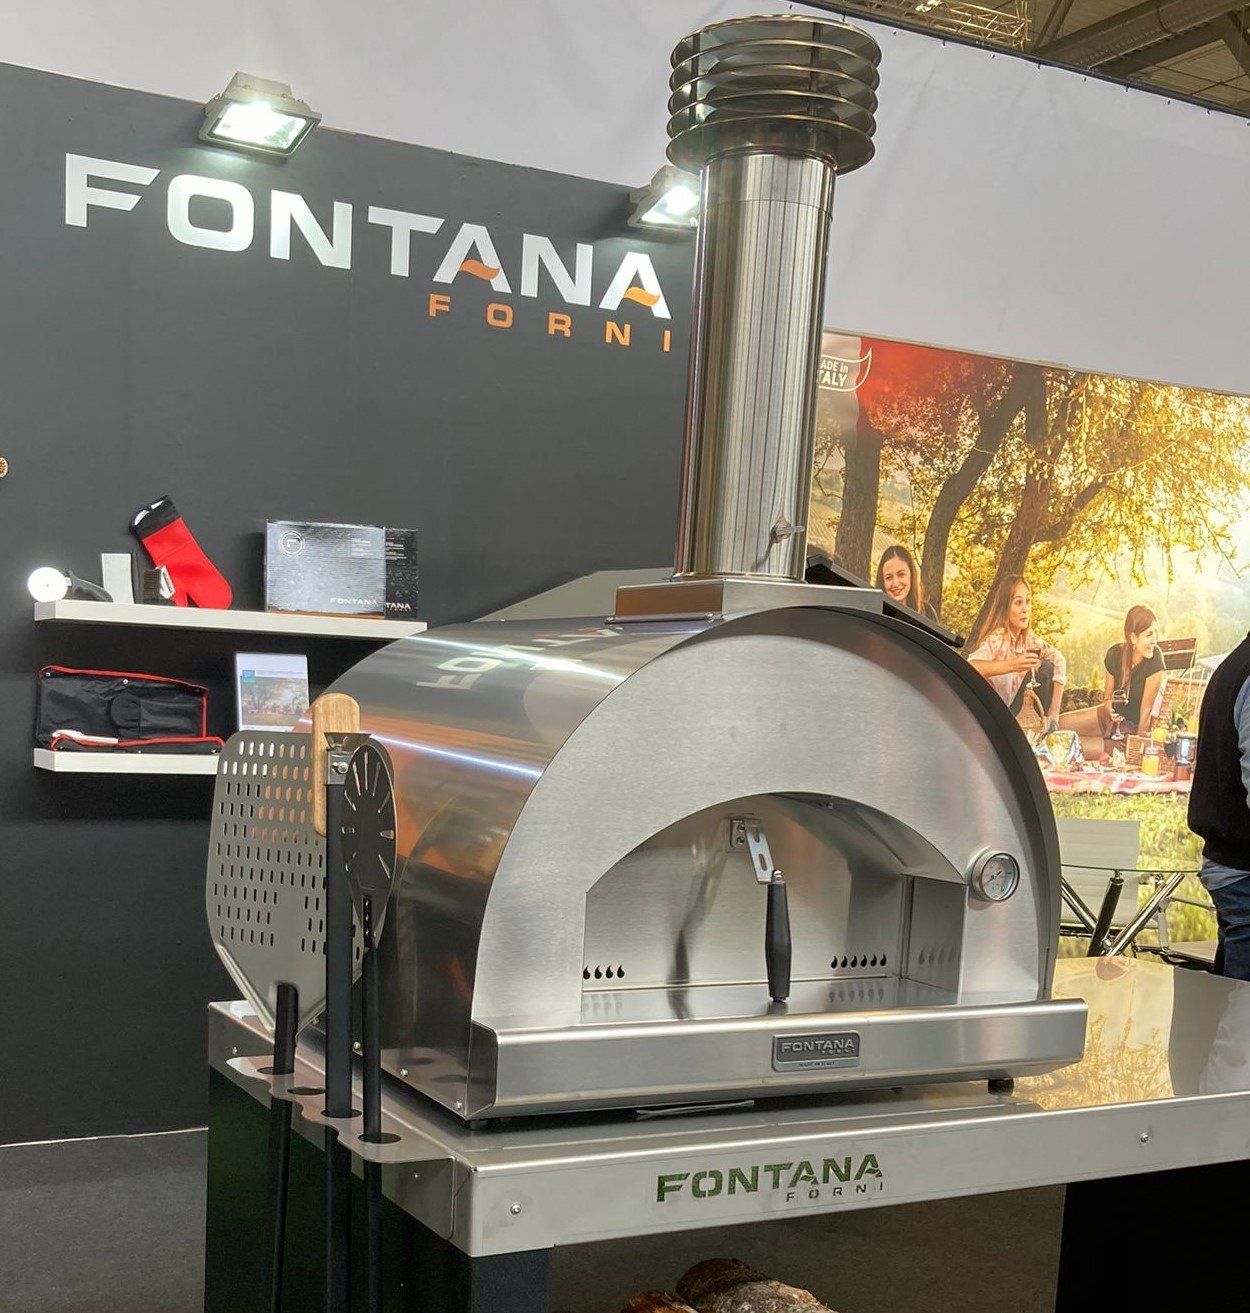 Dome oven Fontana Margherita with wood firing, pizza oven for the outdoor kitchen, inox, trade fair exhibit